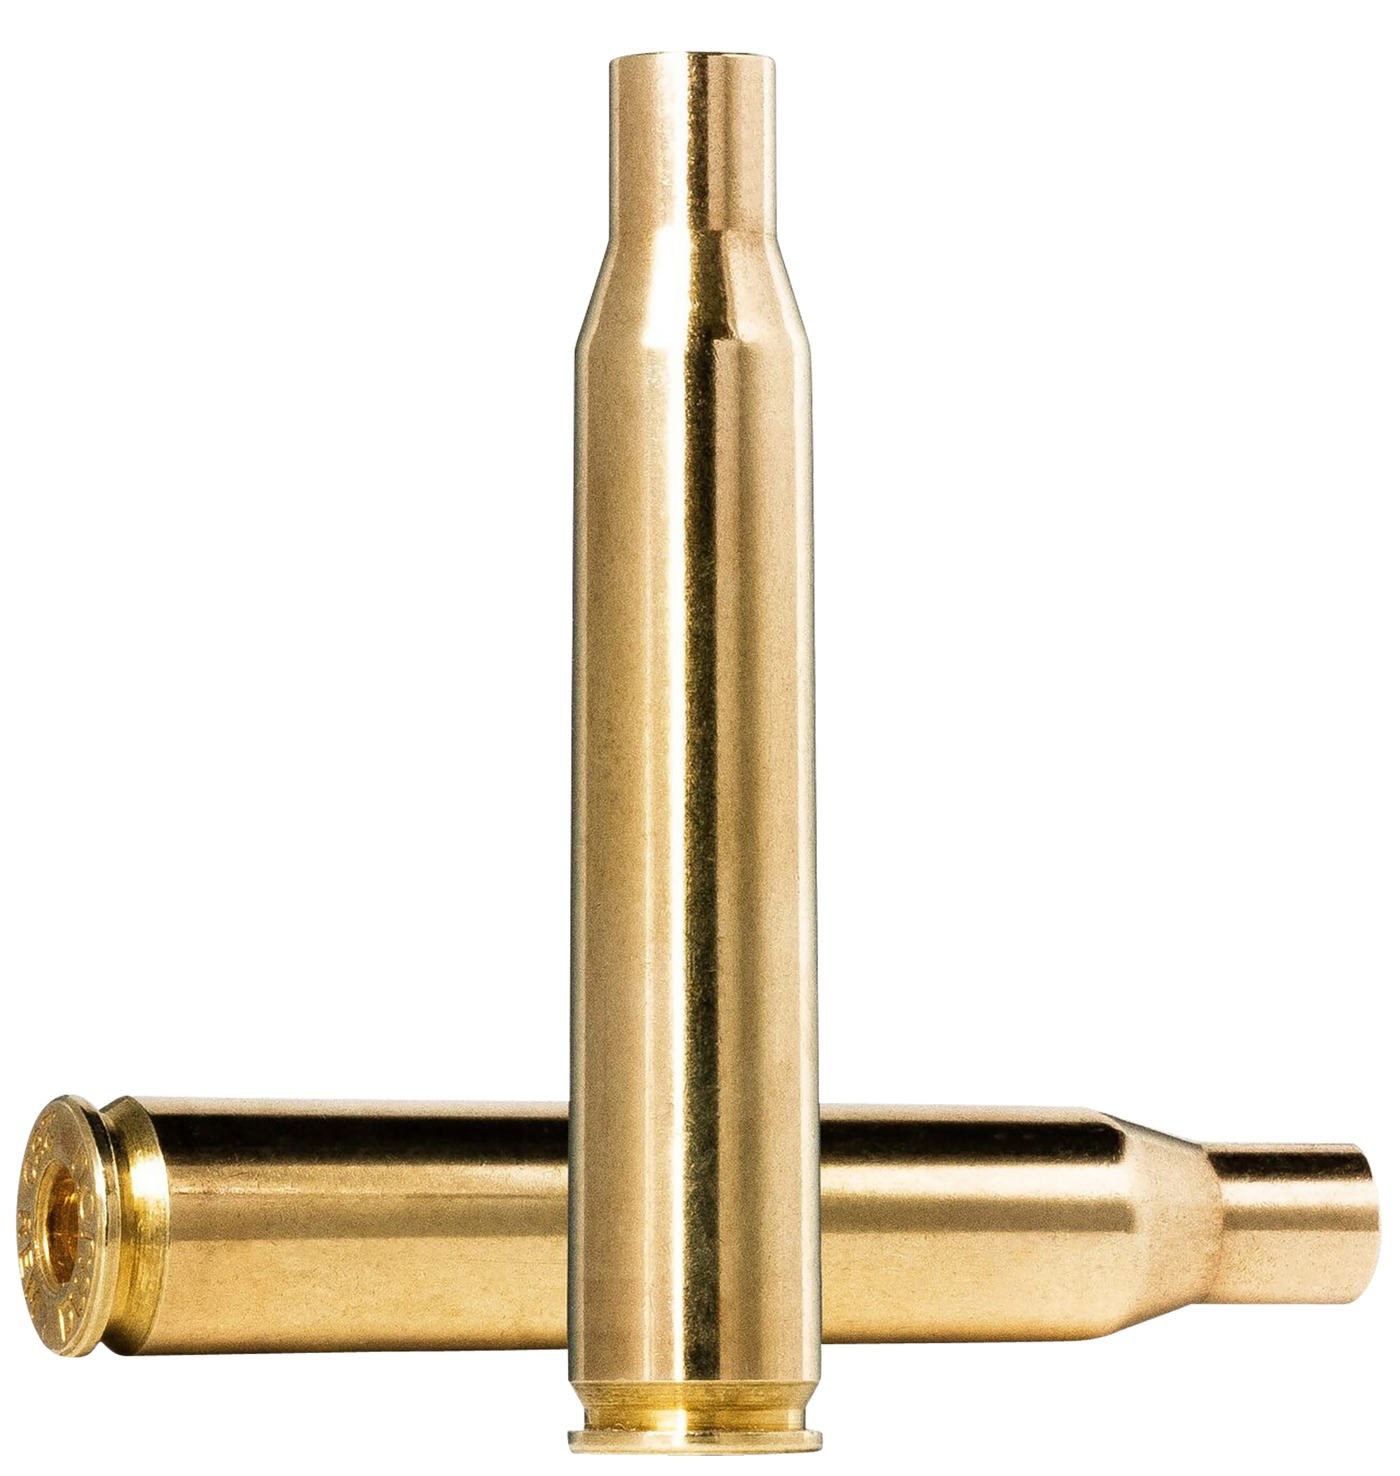 Norma Ammunition (ruag) Dedicated Components, Norma 20257117   222rem        Brass         50/10